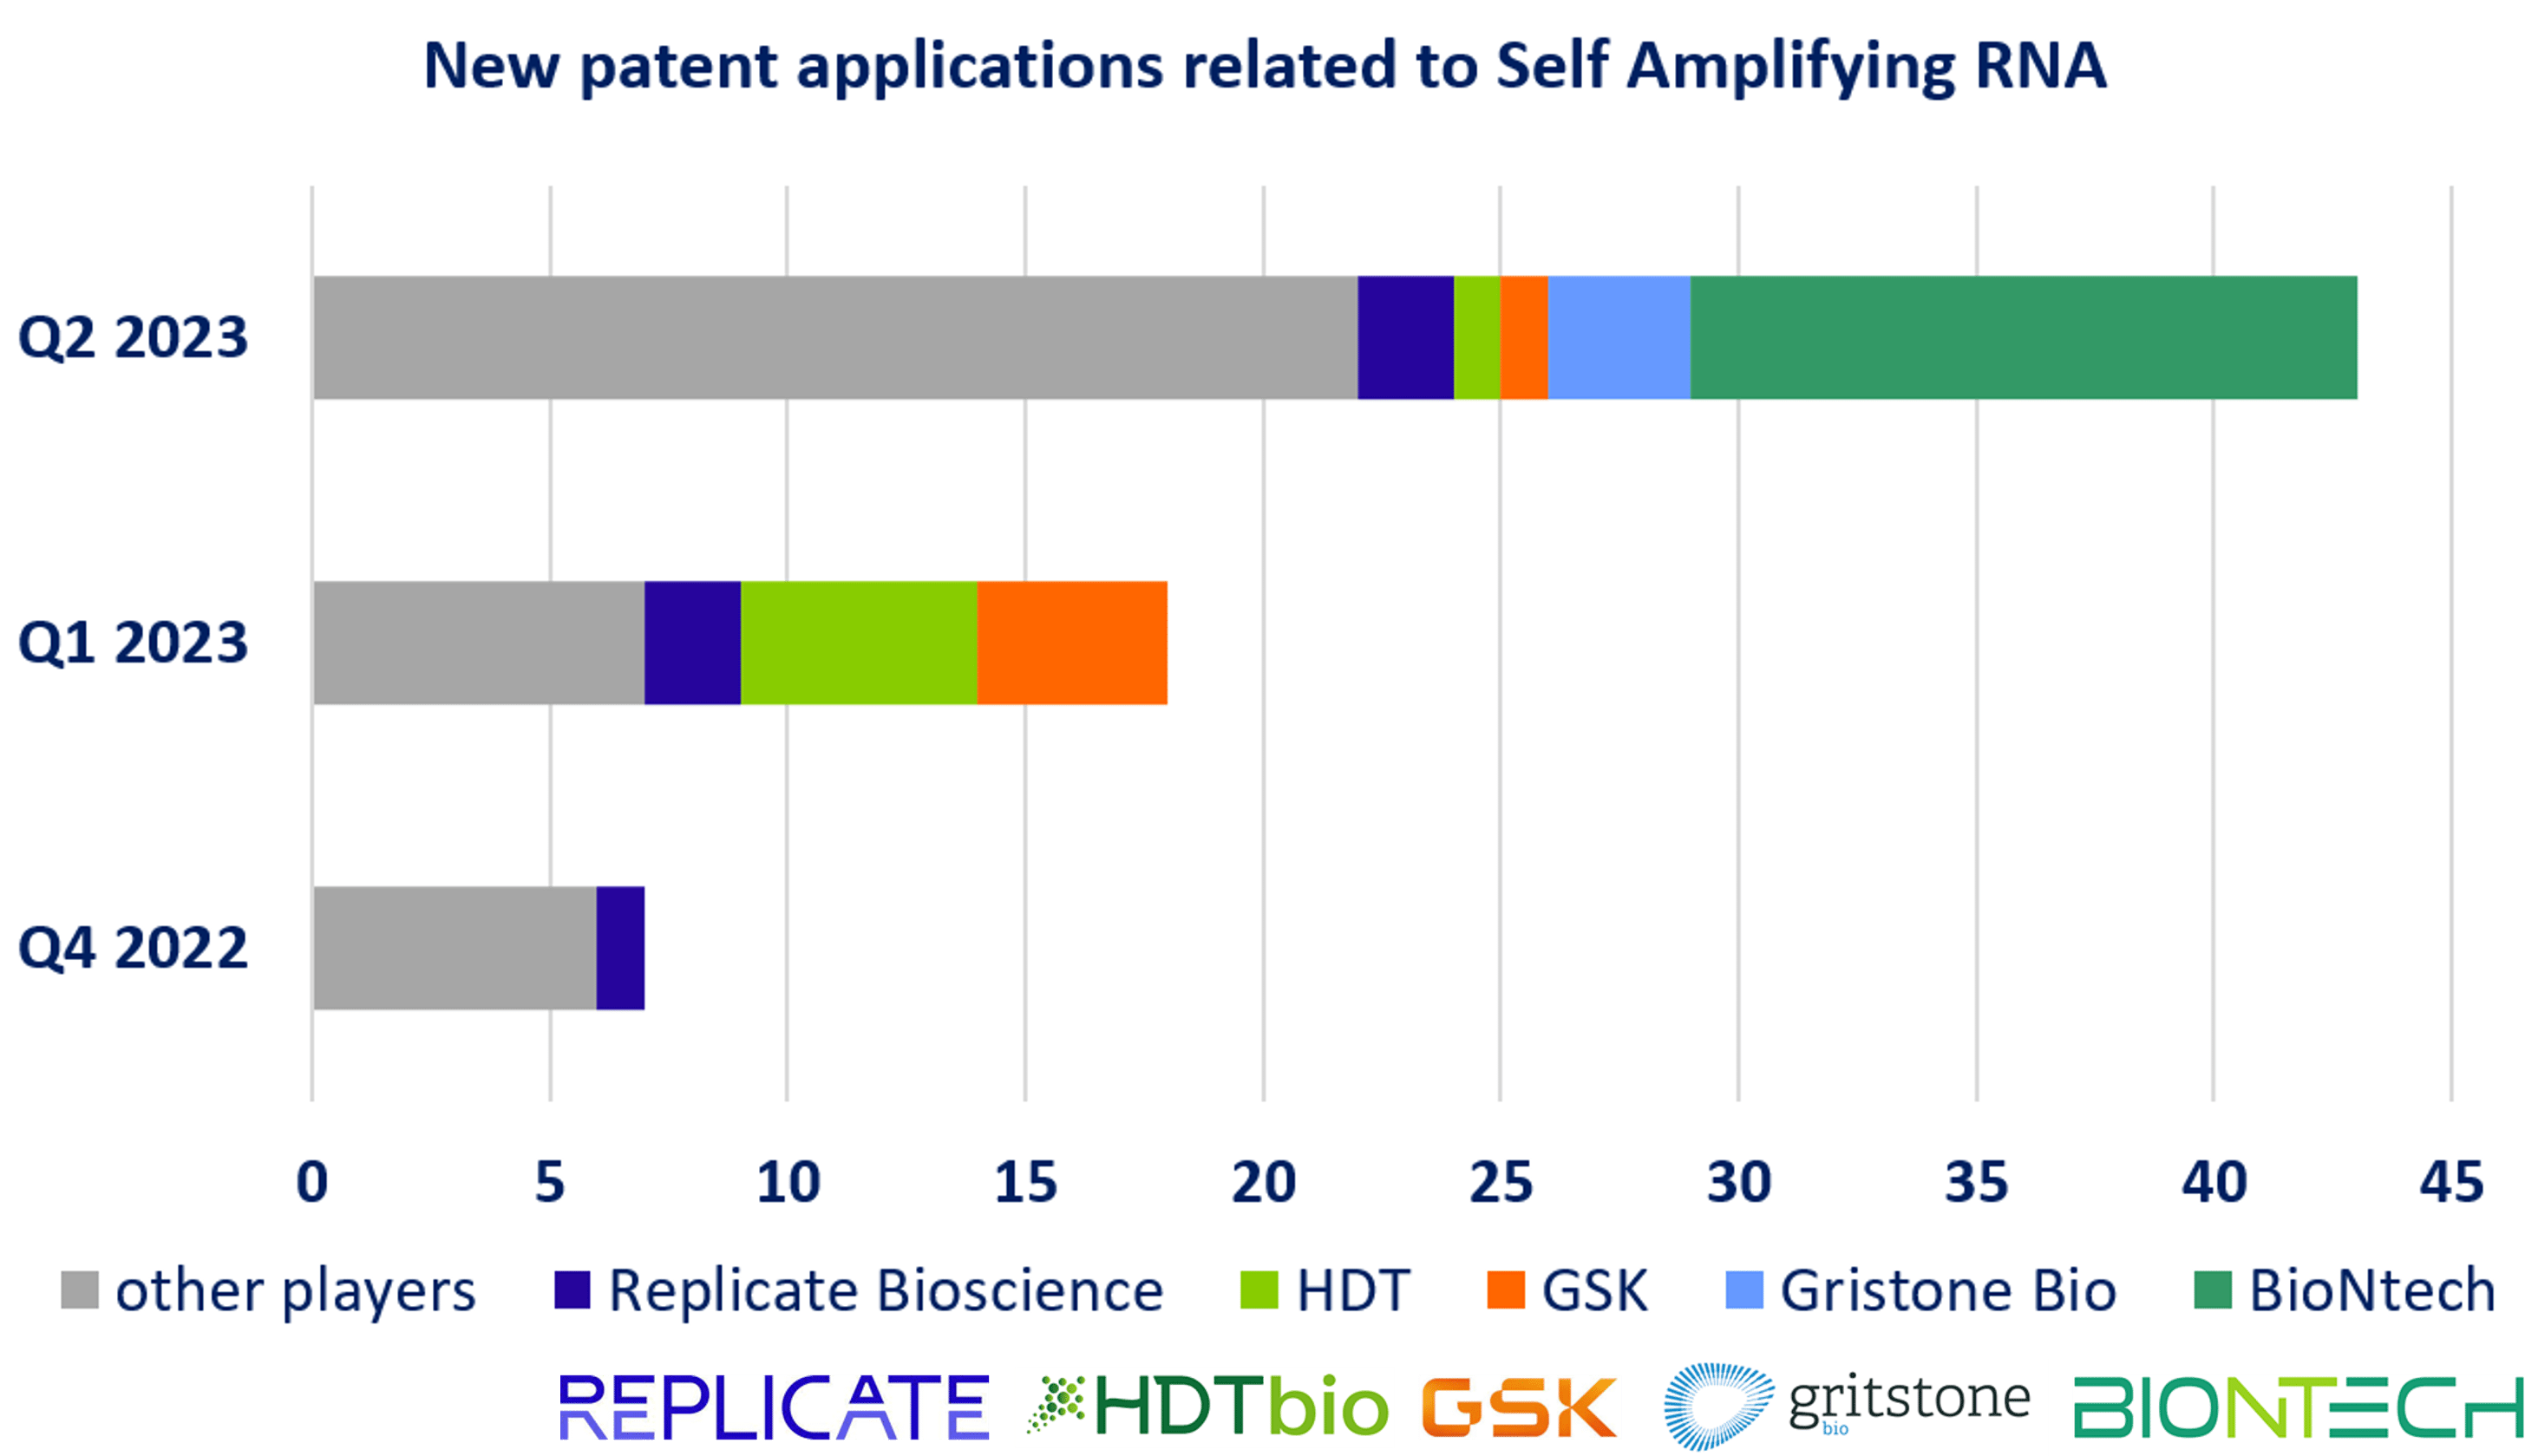 Graphical illustration of the number of new patent applications related to self-amplifying mRNA past three quarters, main players are indicated.